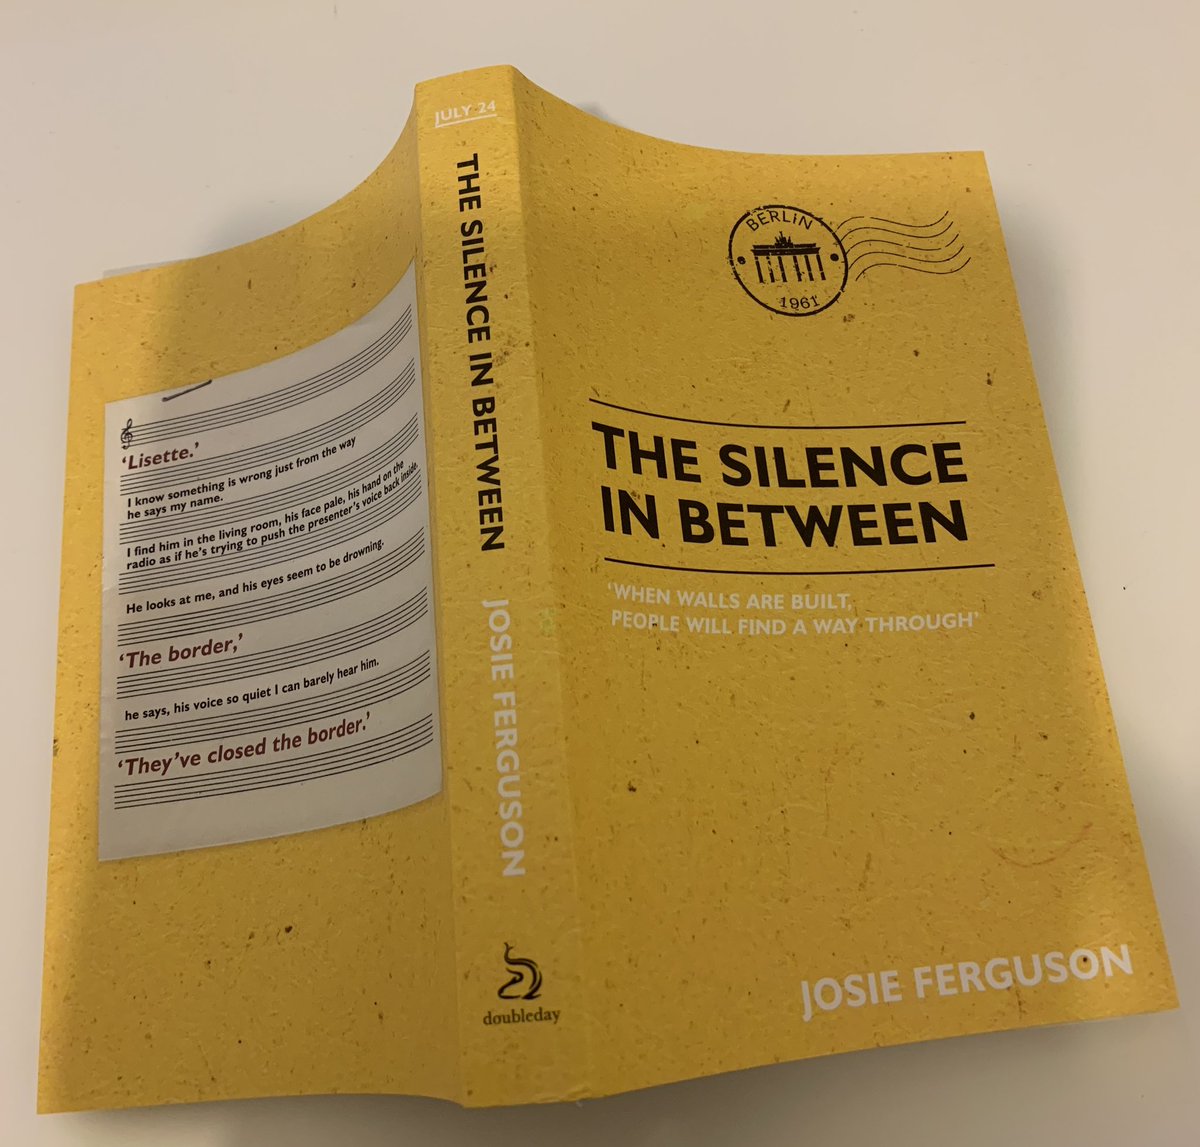 Thank you so much to @Millsreid11 @DoubledayUK for my proof copy of #TheSilenceInBetween This promises to be a gripping read! Publication date: 20 June #BookTwitter #BookTwt #BookBlogger #BookMail